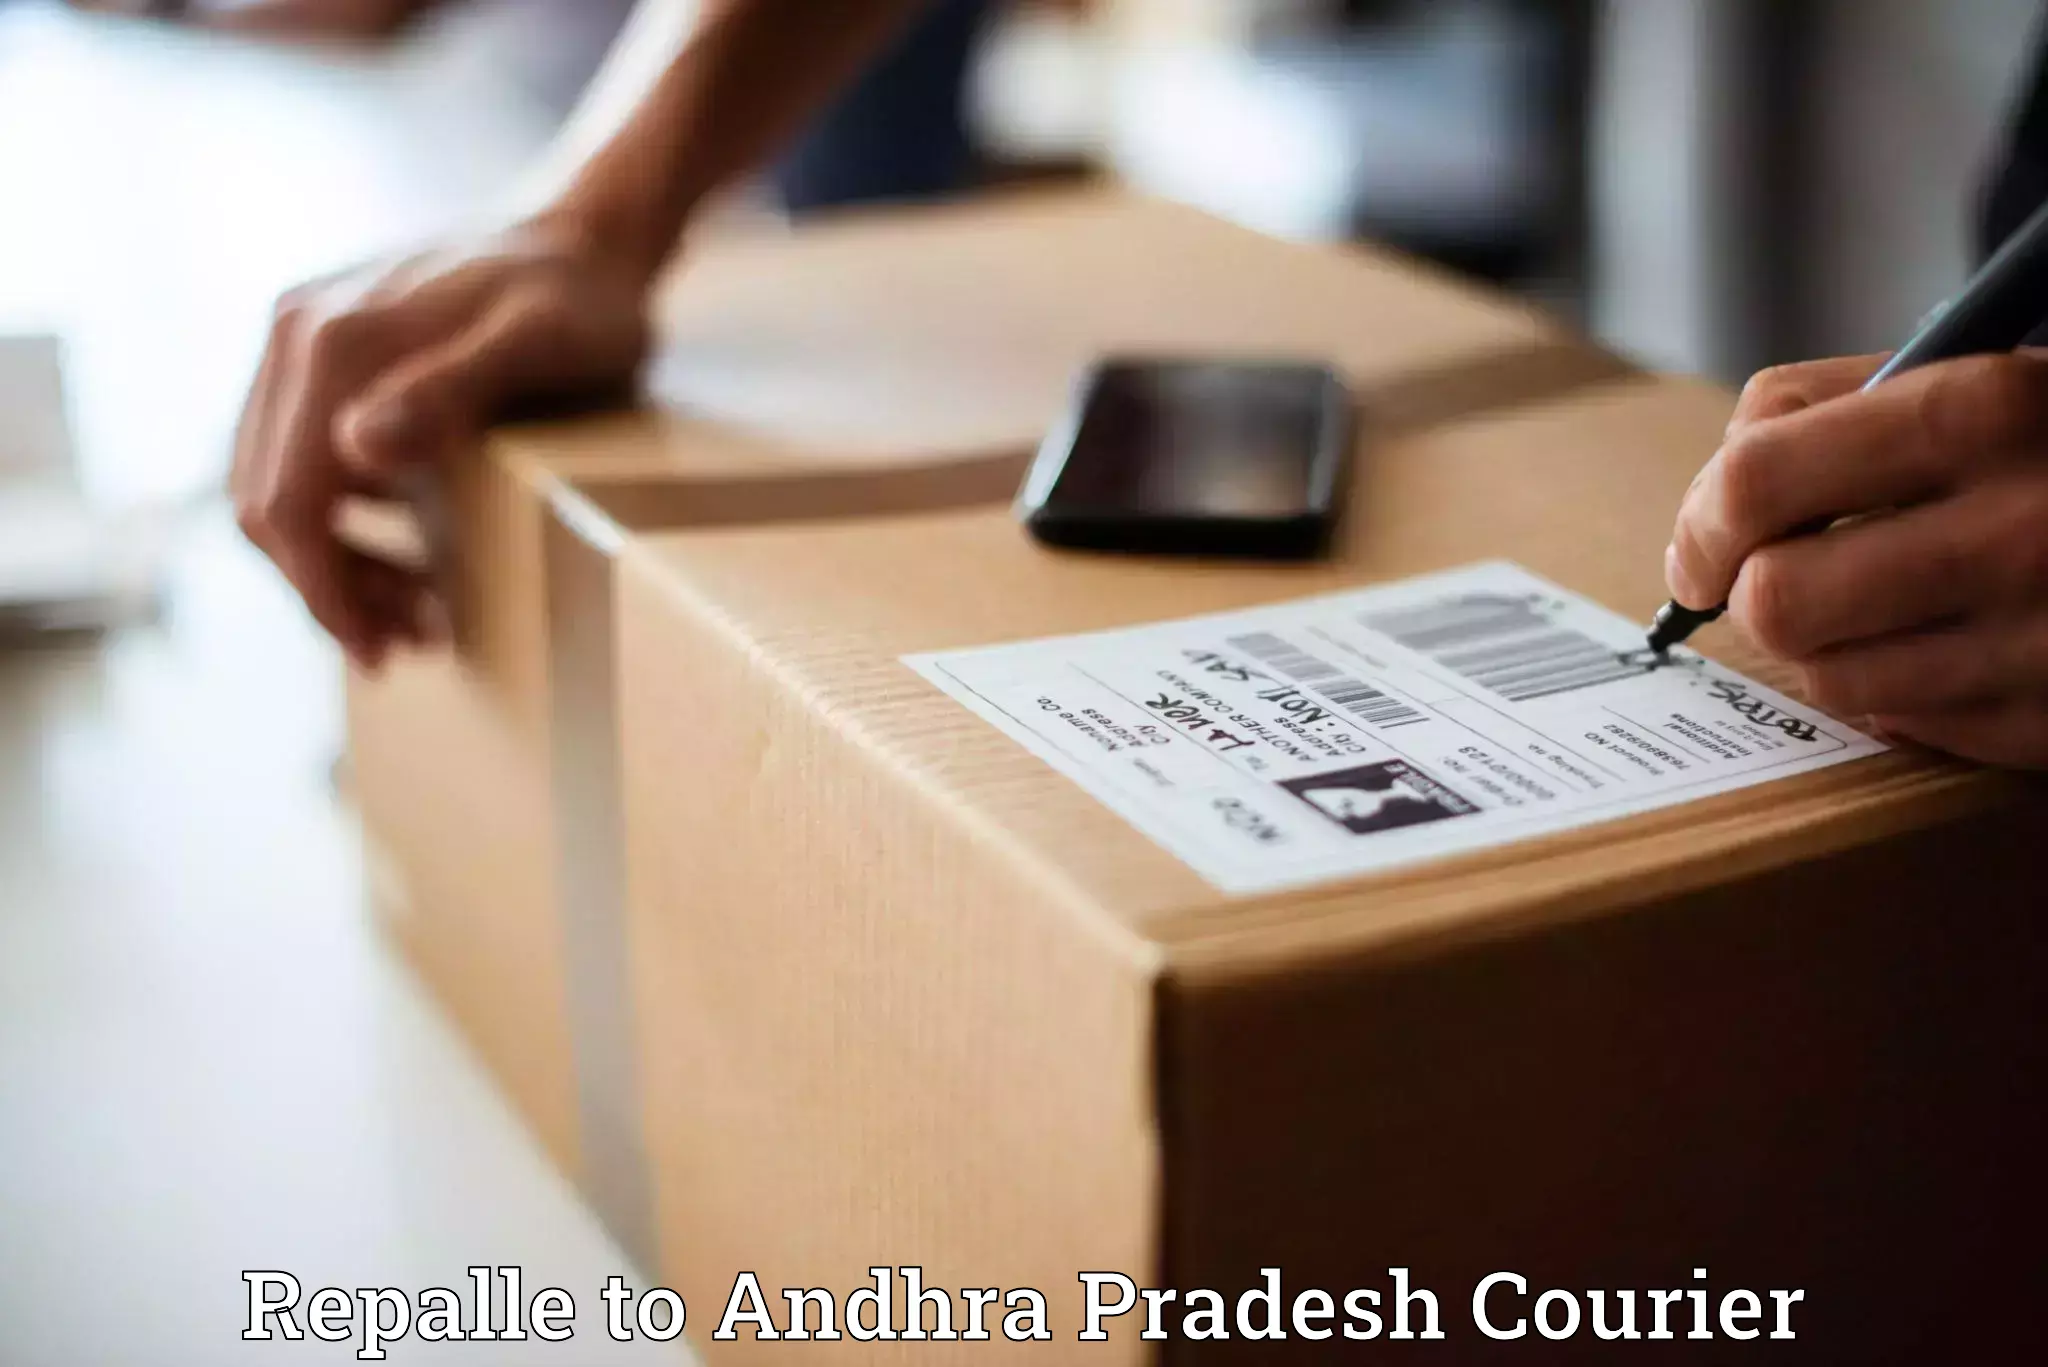 Package delivery network Repalle to Palasa